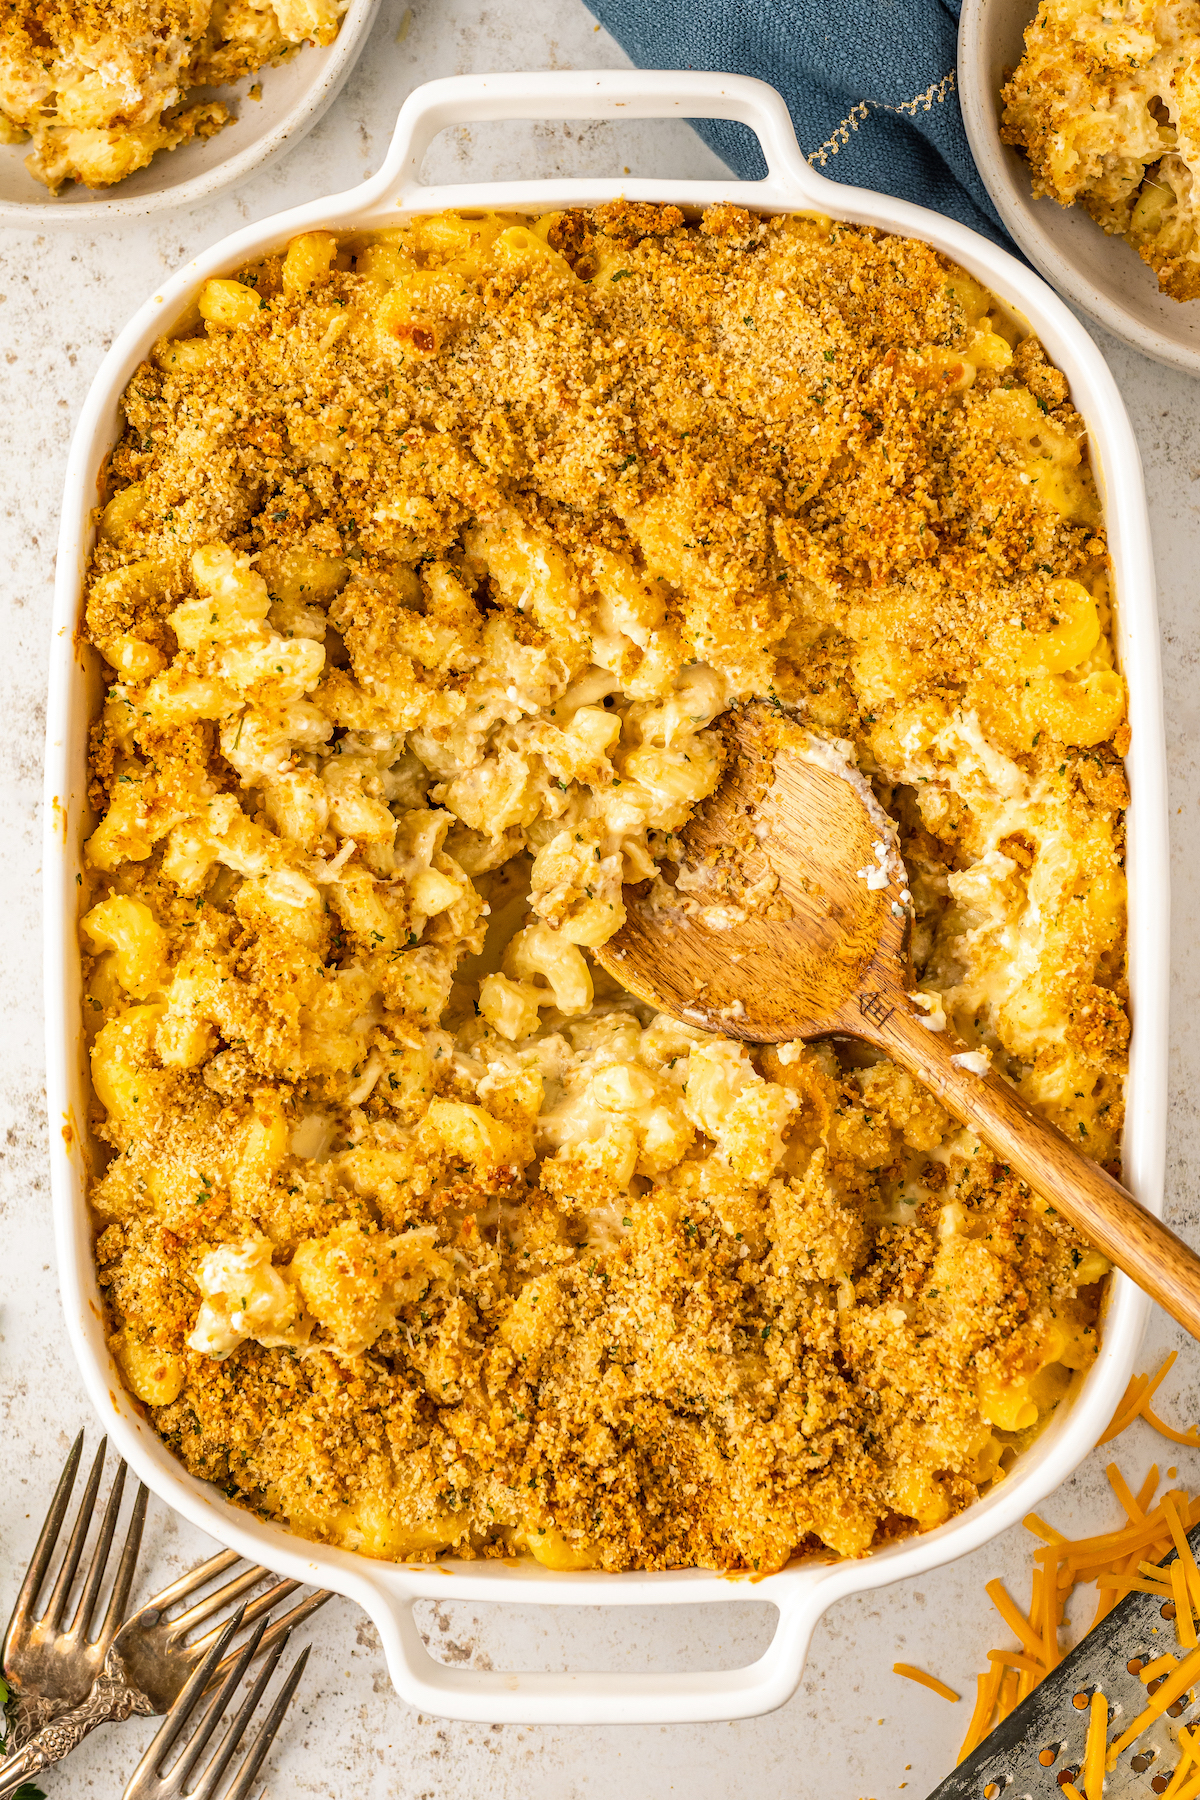 Extra cheese and creamy mac and cheese in a casserole dish after baking with a crispy panko breadcrumb topping and a wooden spoon in the casserole ready to serve.